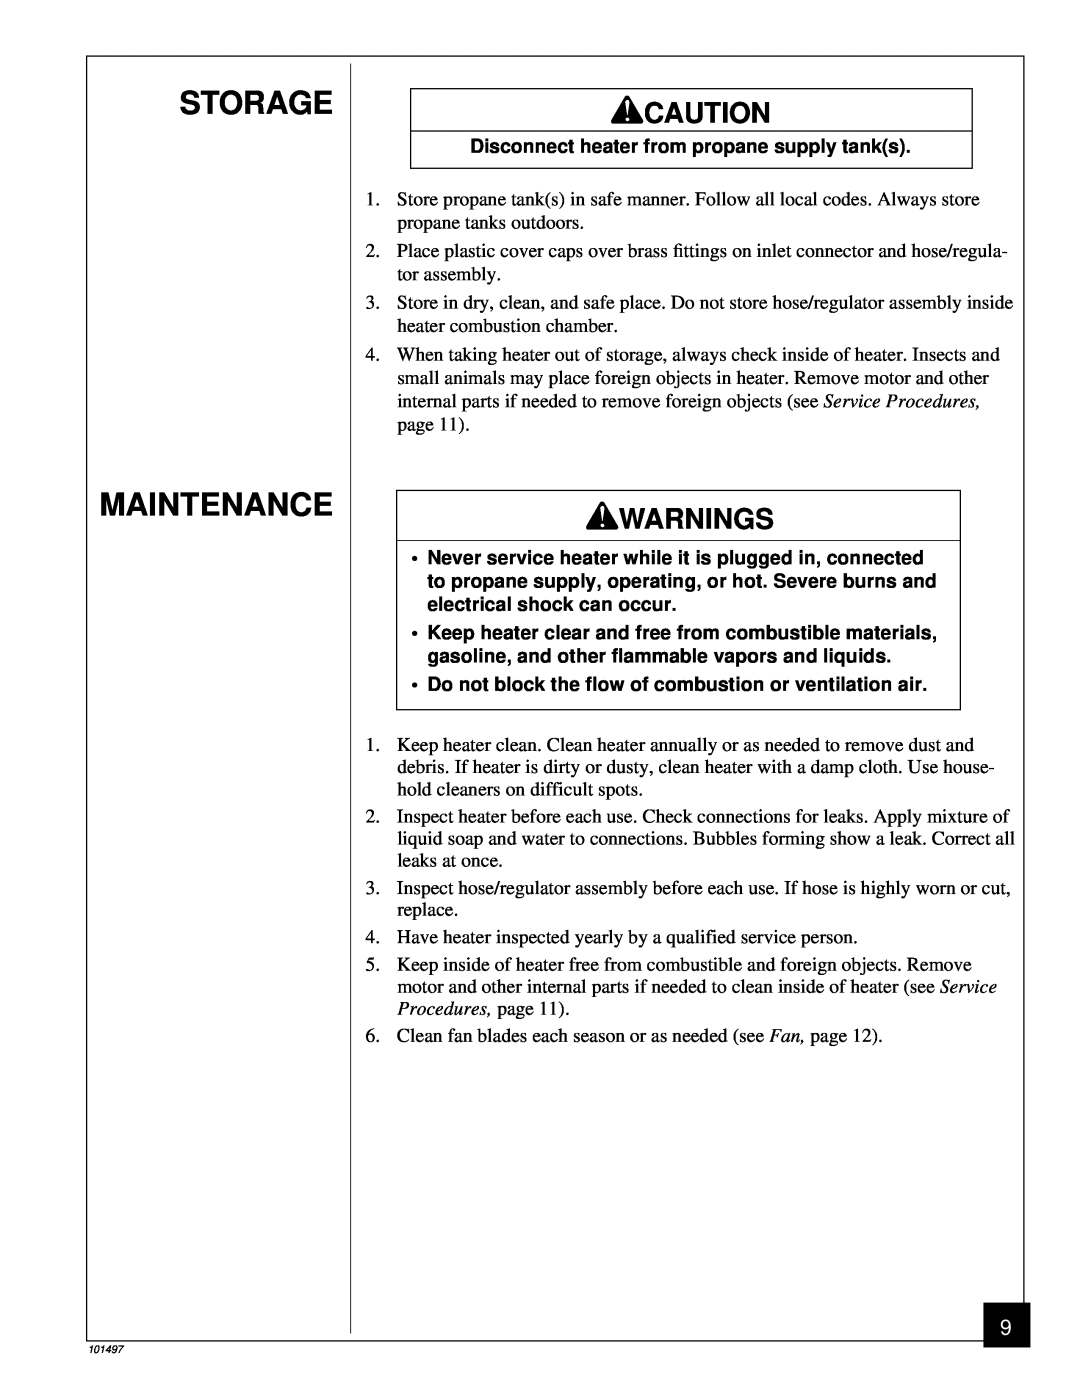 Homelite HHC50LP owner manual Storage Maintenance, Warnings, Disconnect heater from propane supply tanks 